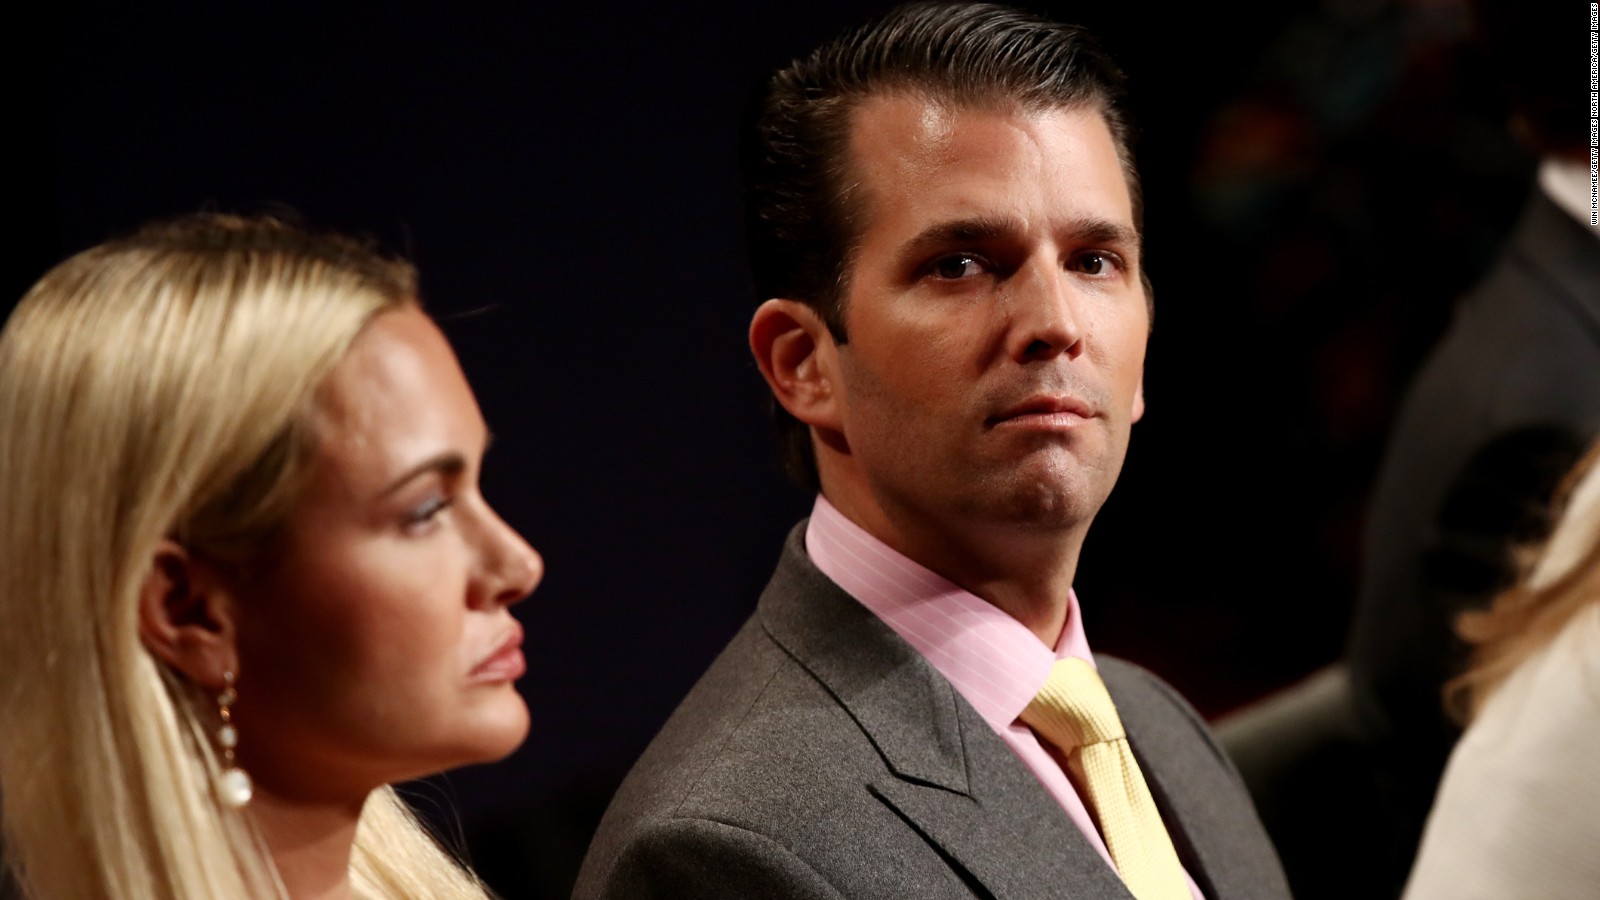 Source Justice Dept. probe will look at Trump Jr.'s disclosed emails